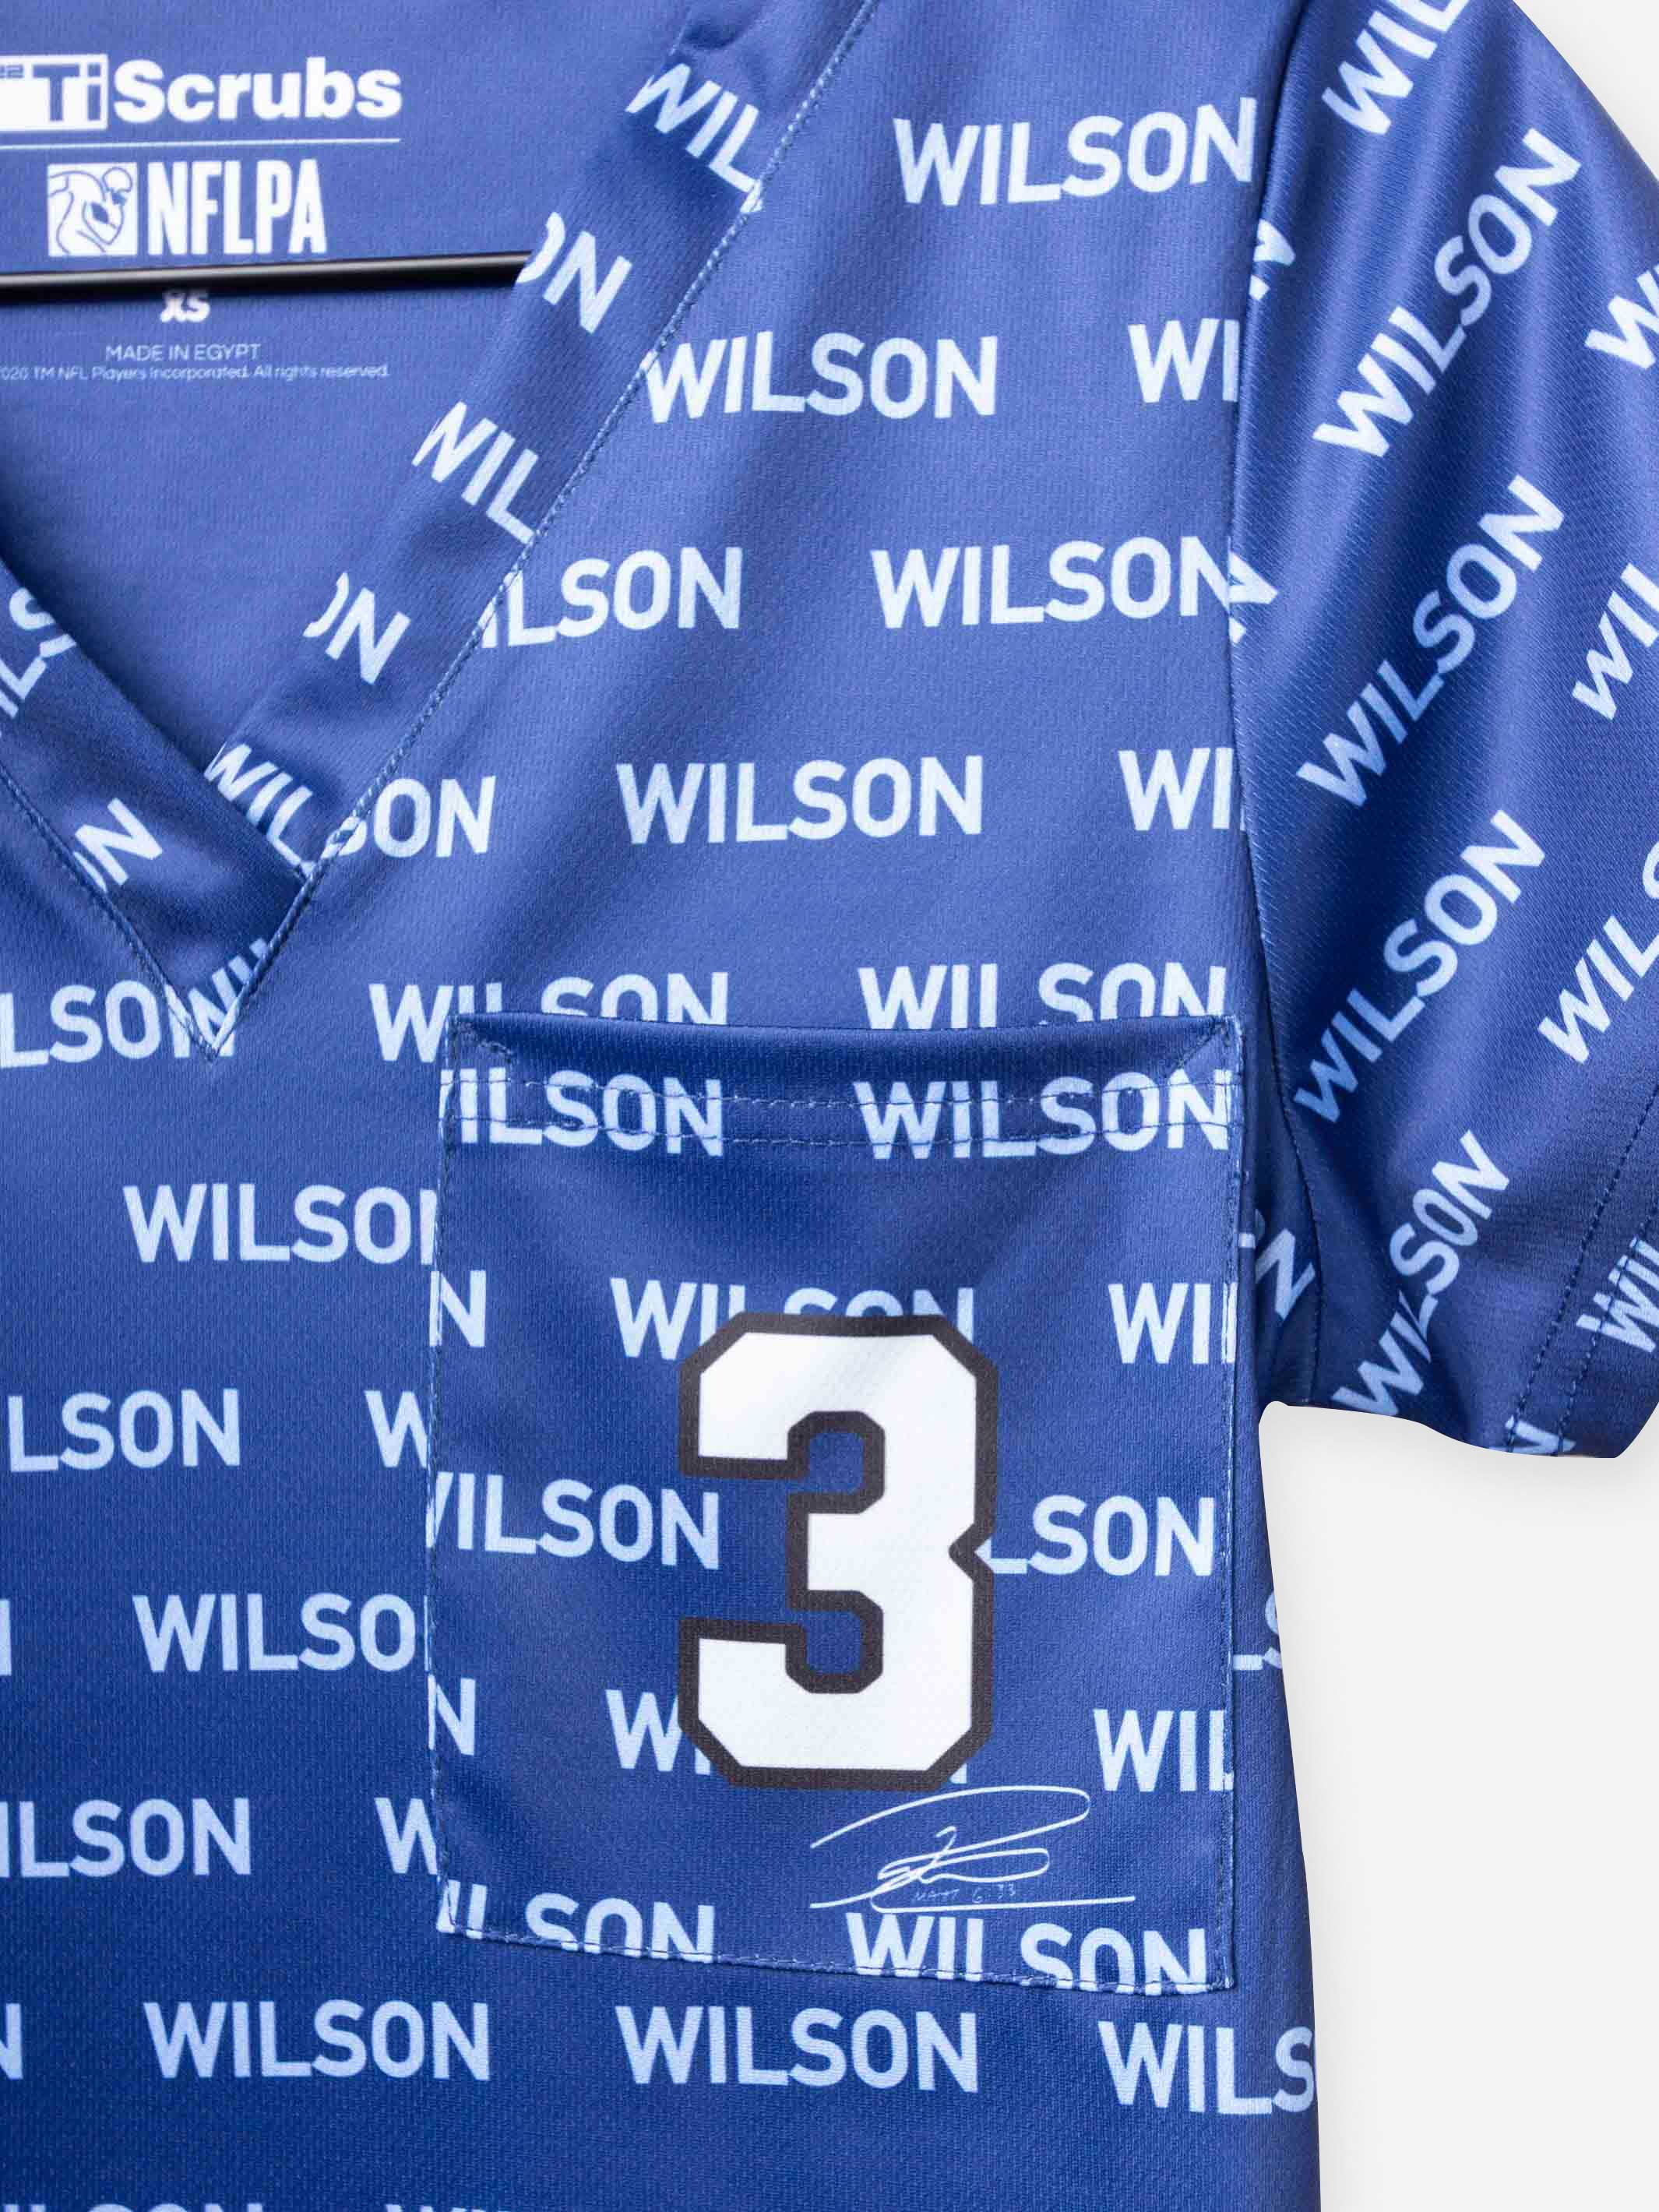 Women's NFLPA Russel Wilson Jersey Scrub Top number 3 with signature